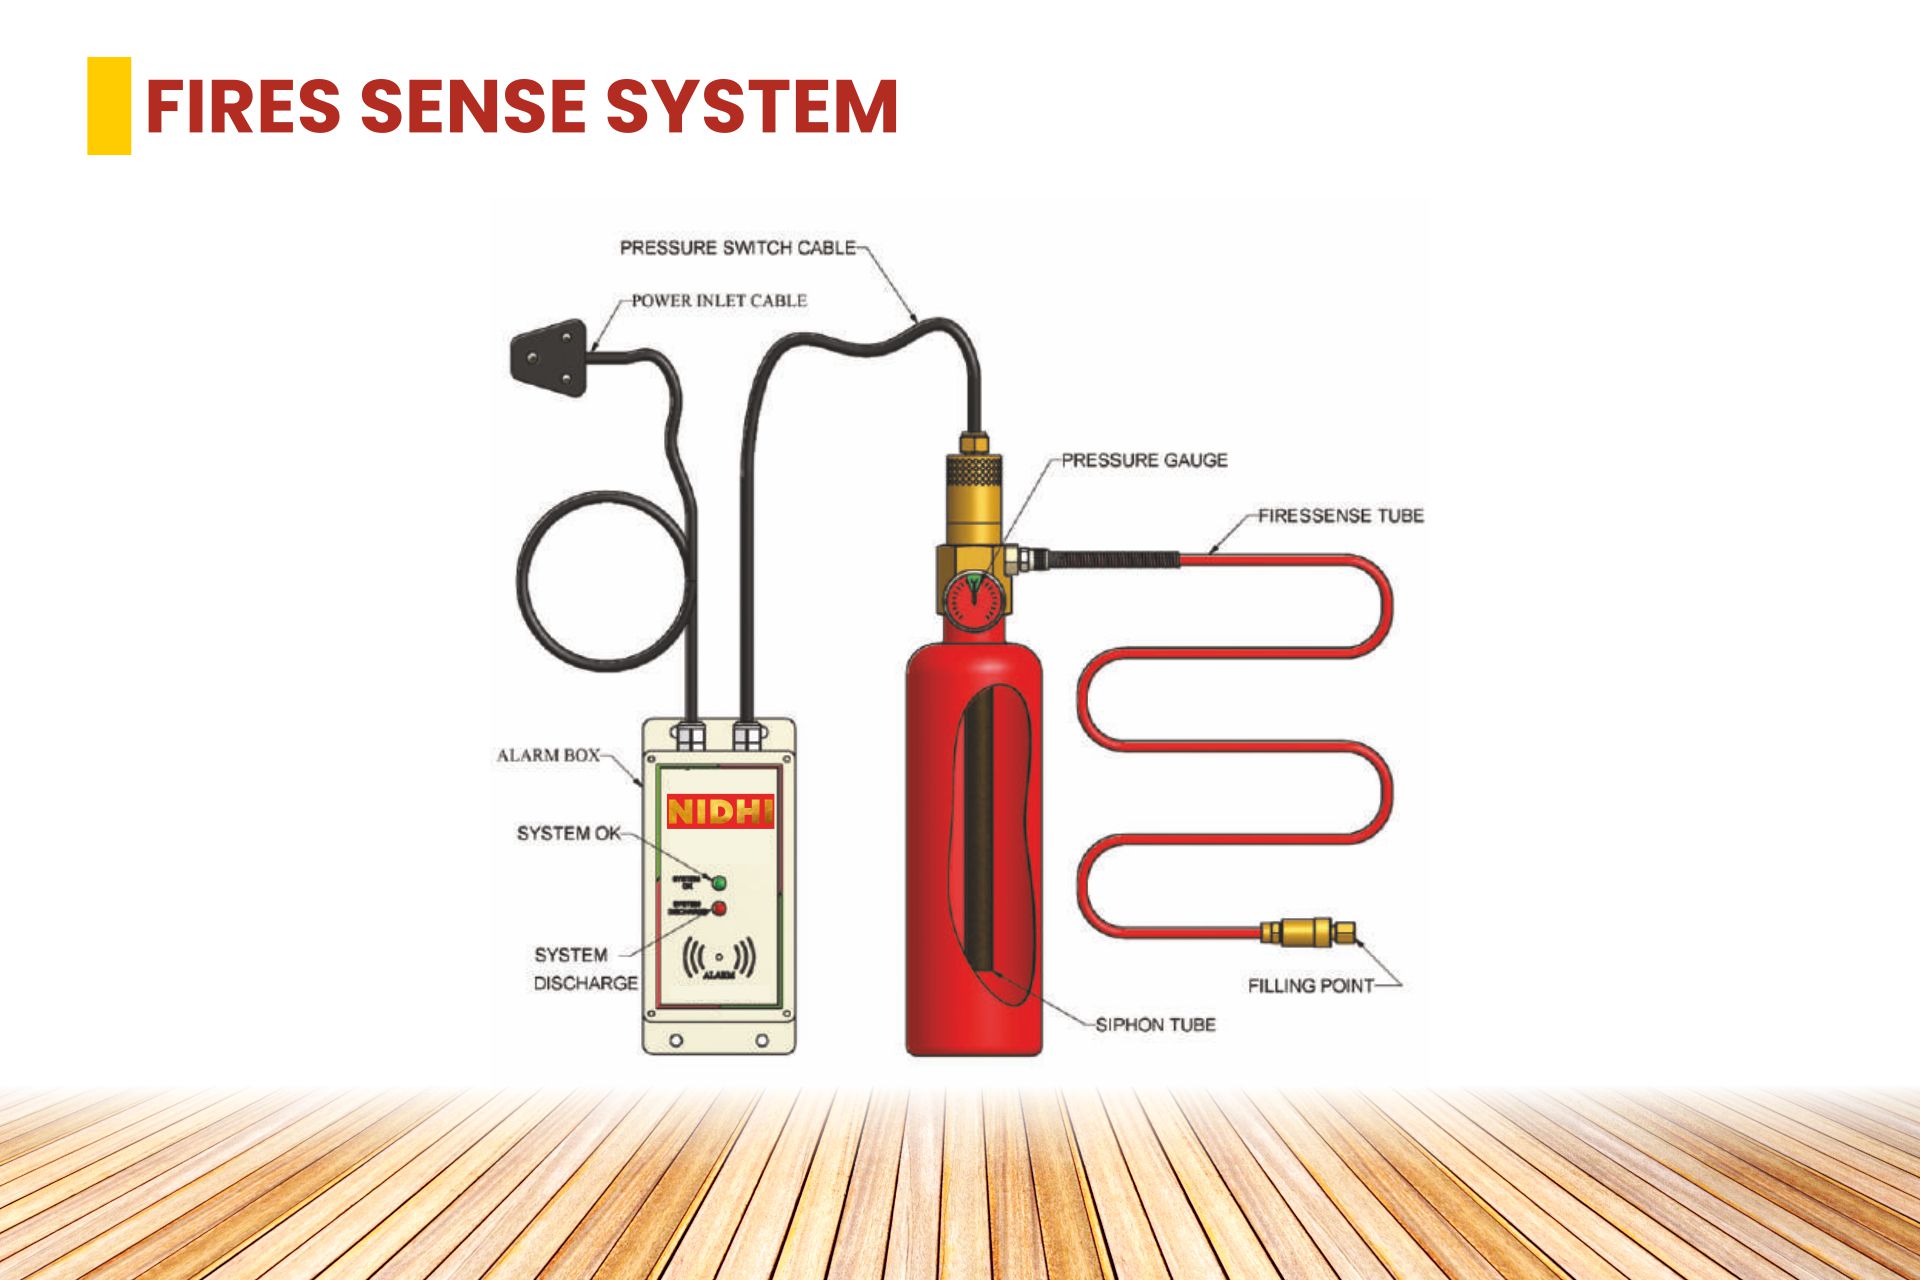 FIRE SENSE SYSTEM Product 1